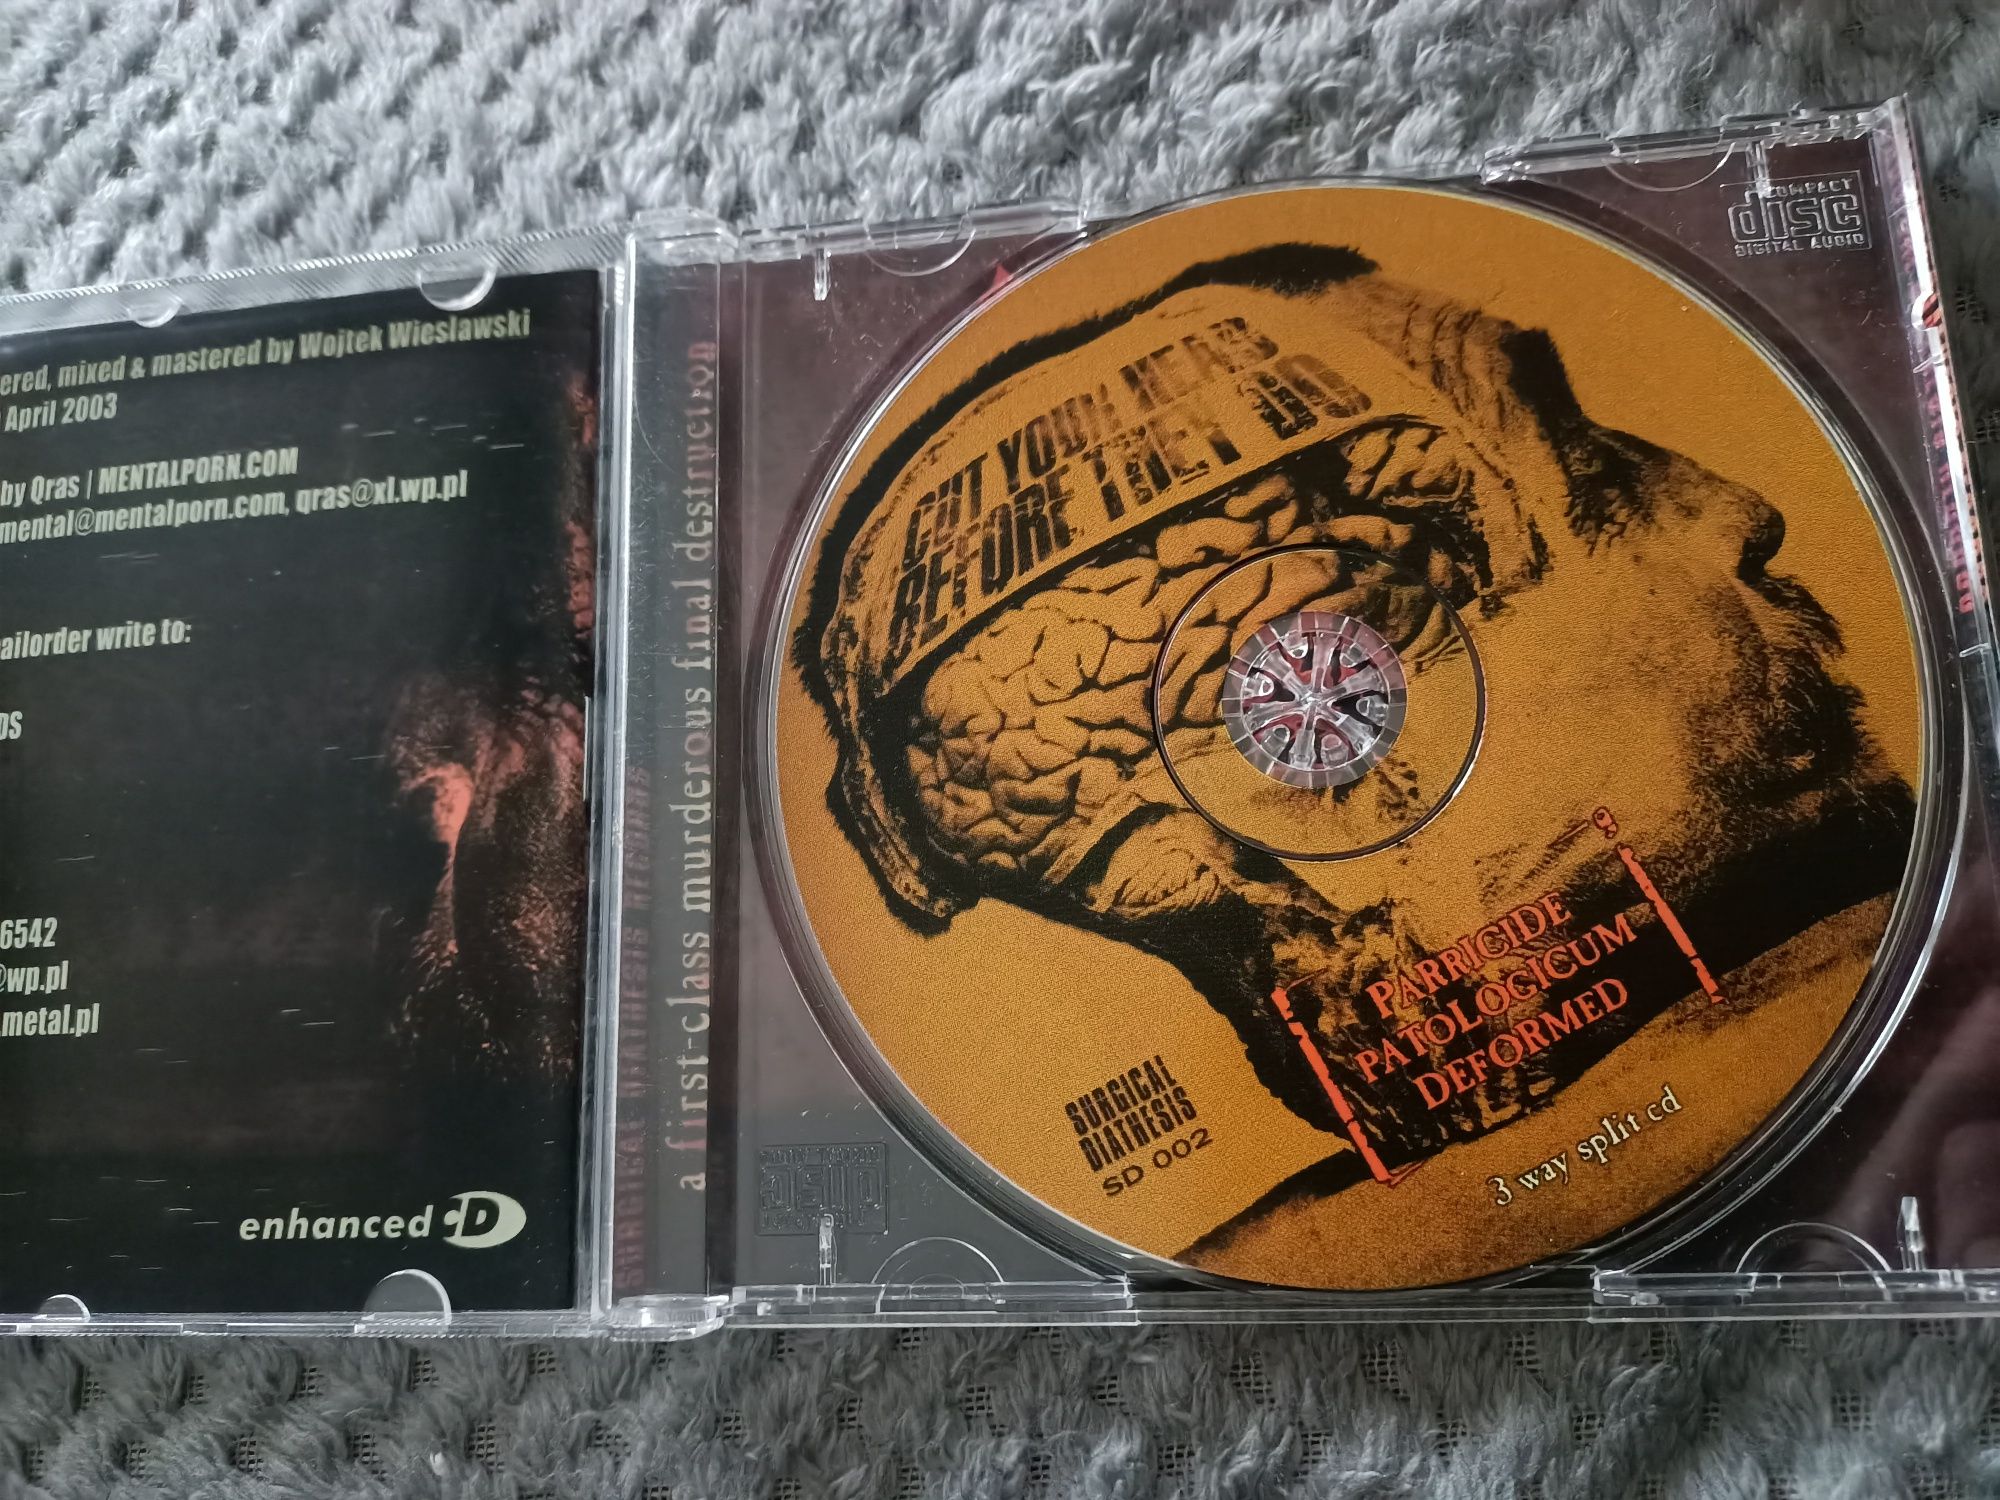 Parricide / Patologicum / Deformed - Cut Your Head Before They Do (CD,